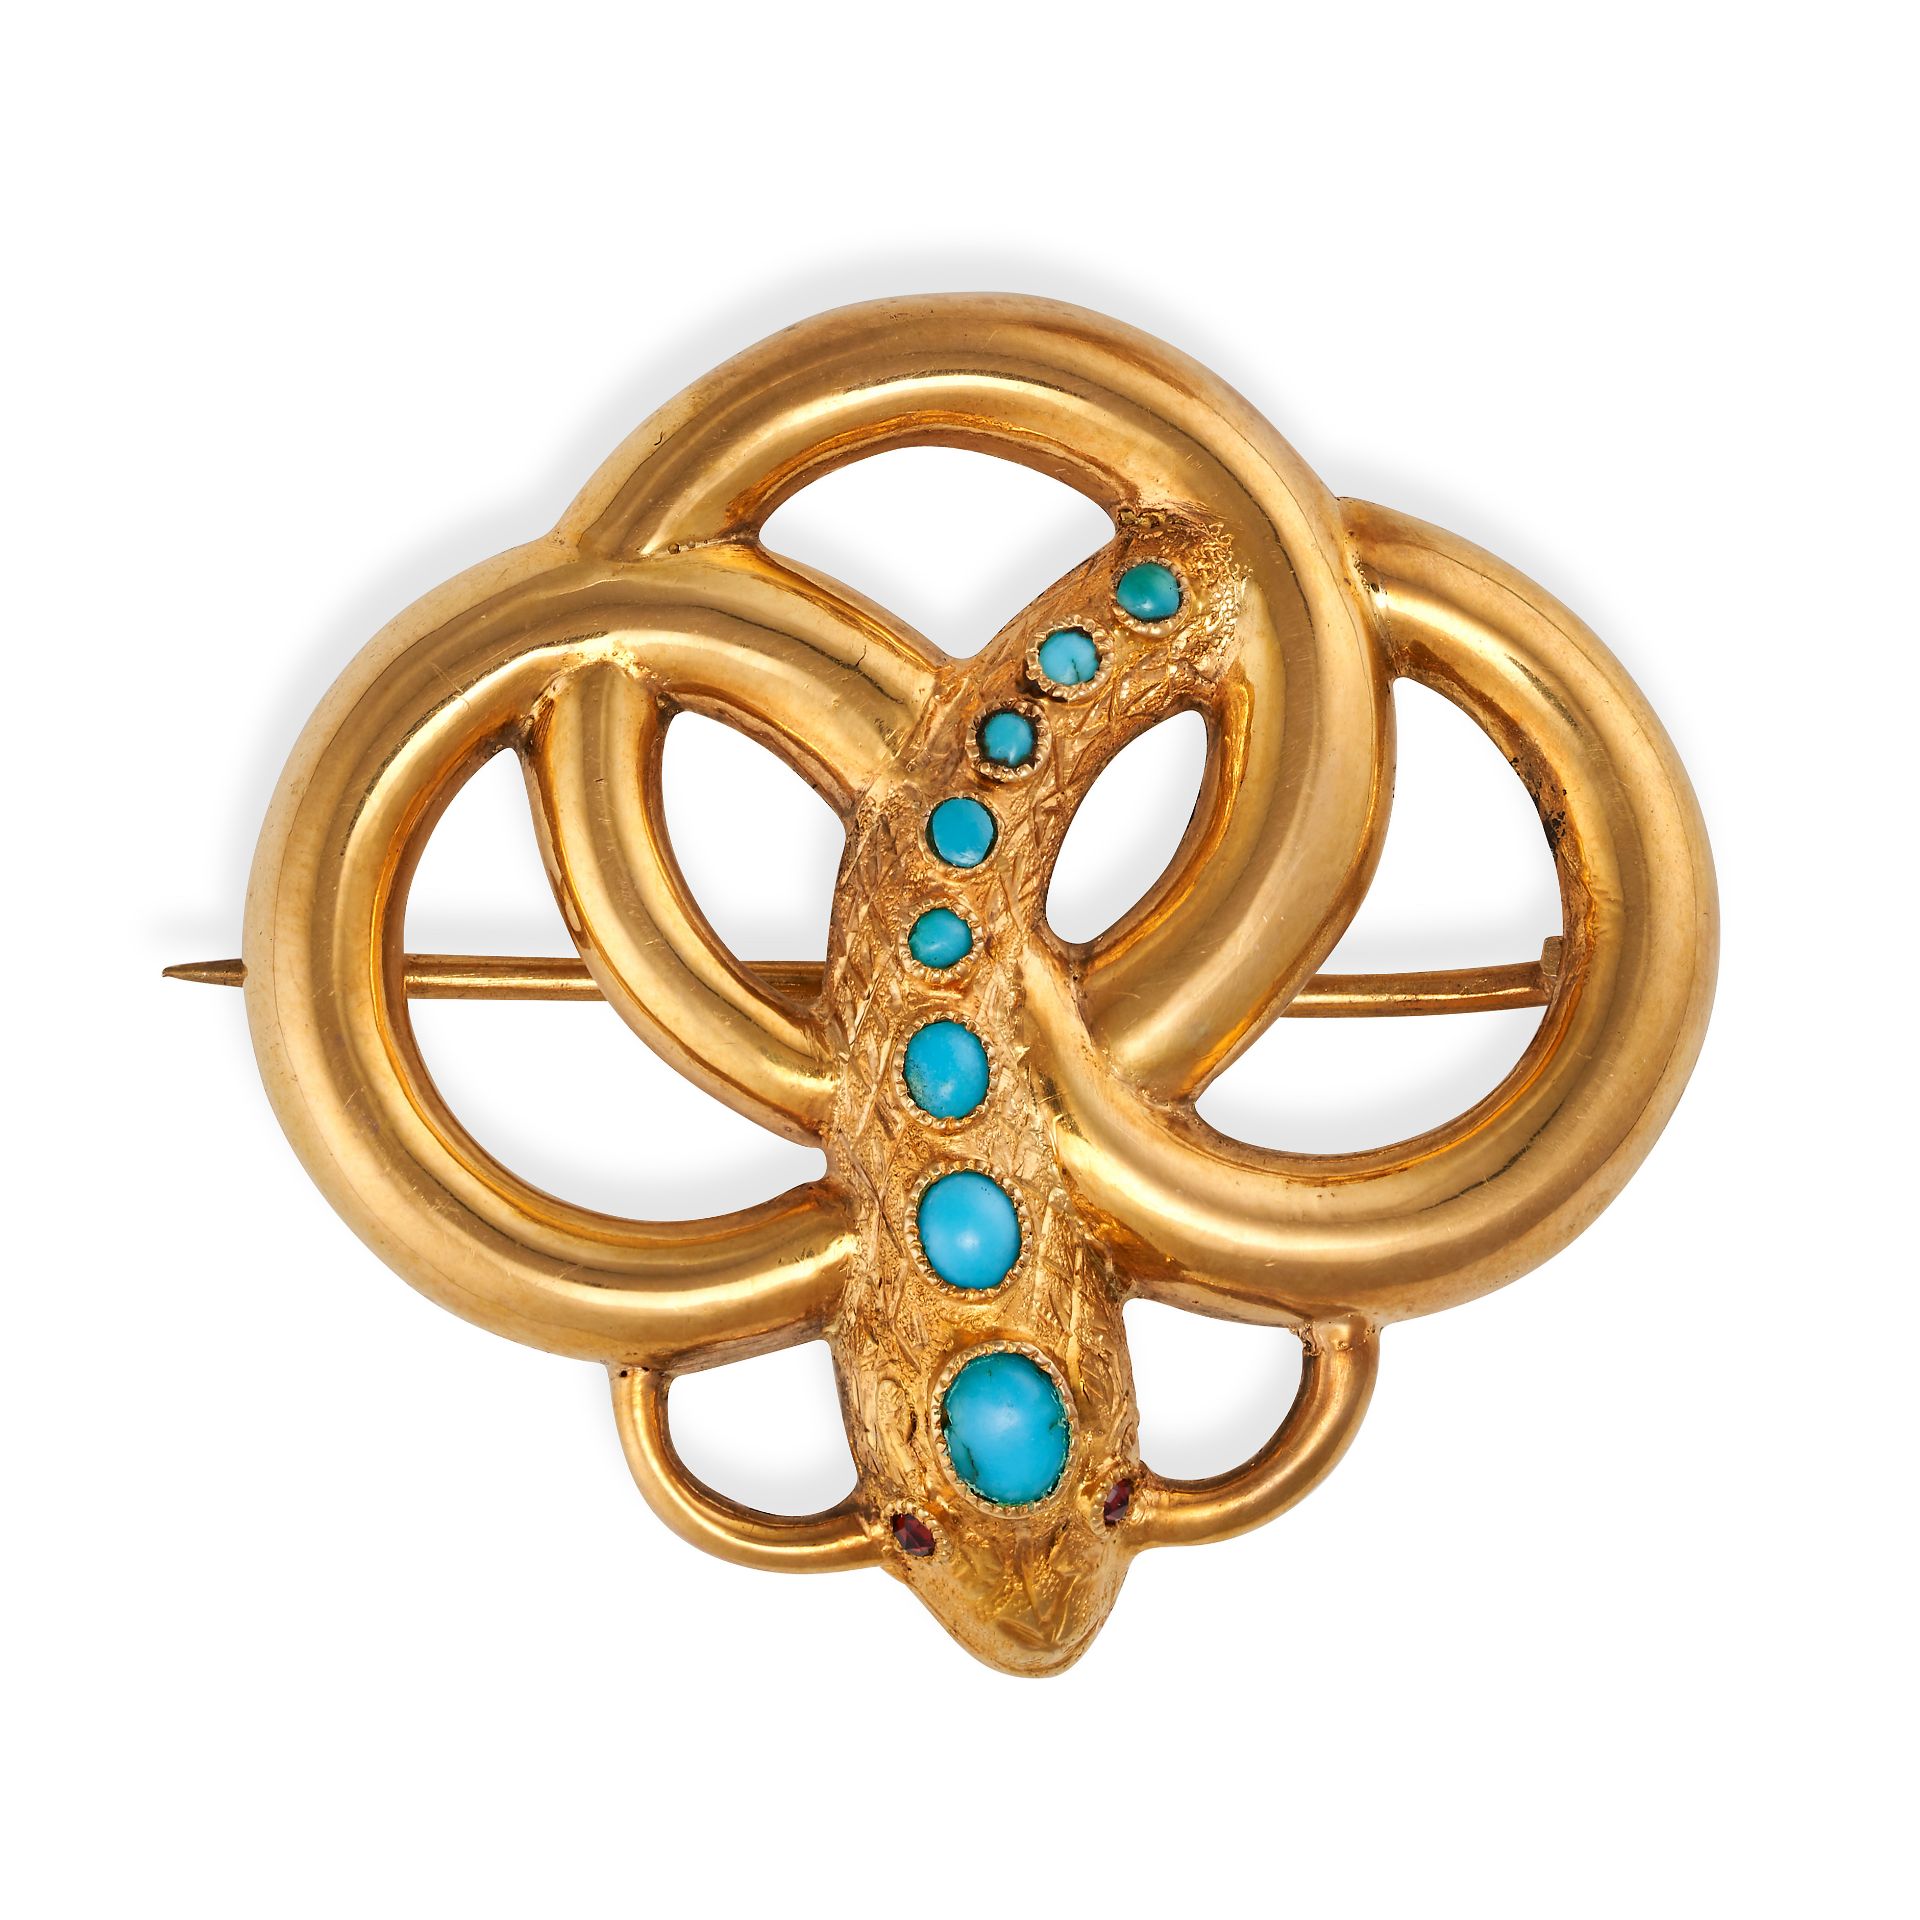 A TURQUOISE AND GARNET SNAKE BROOCH in yellow gold, designed as a coiled snake, the head set with...